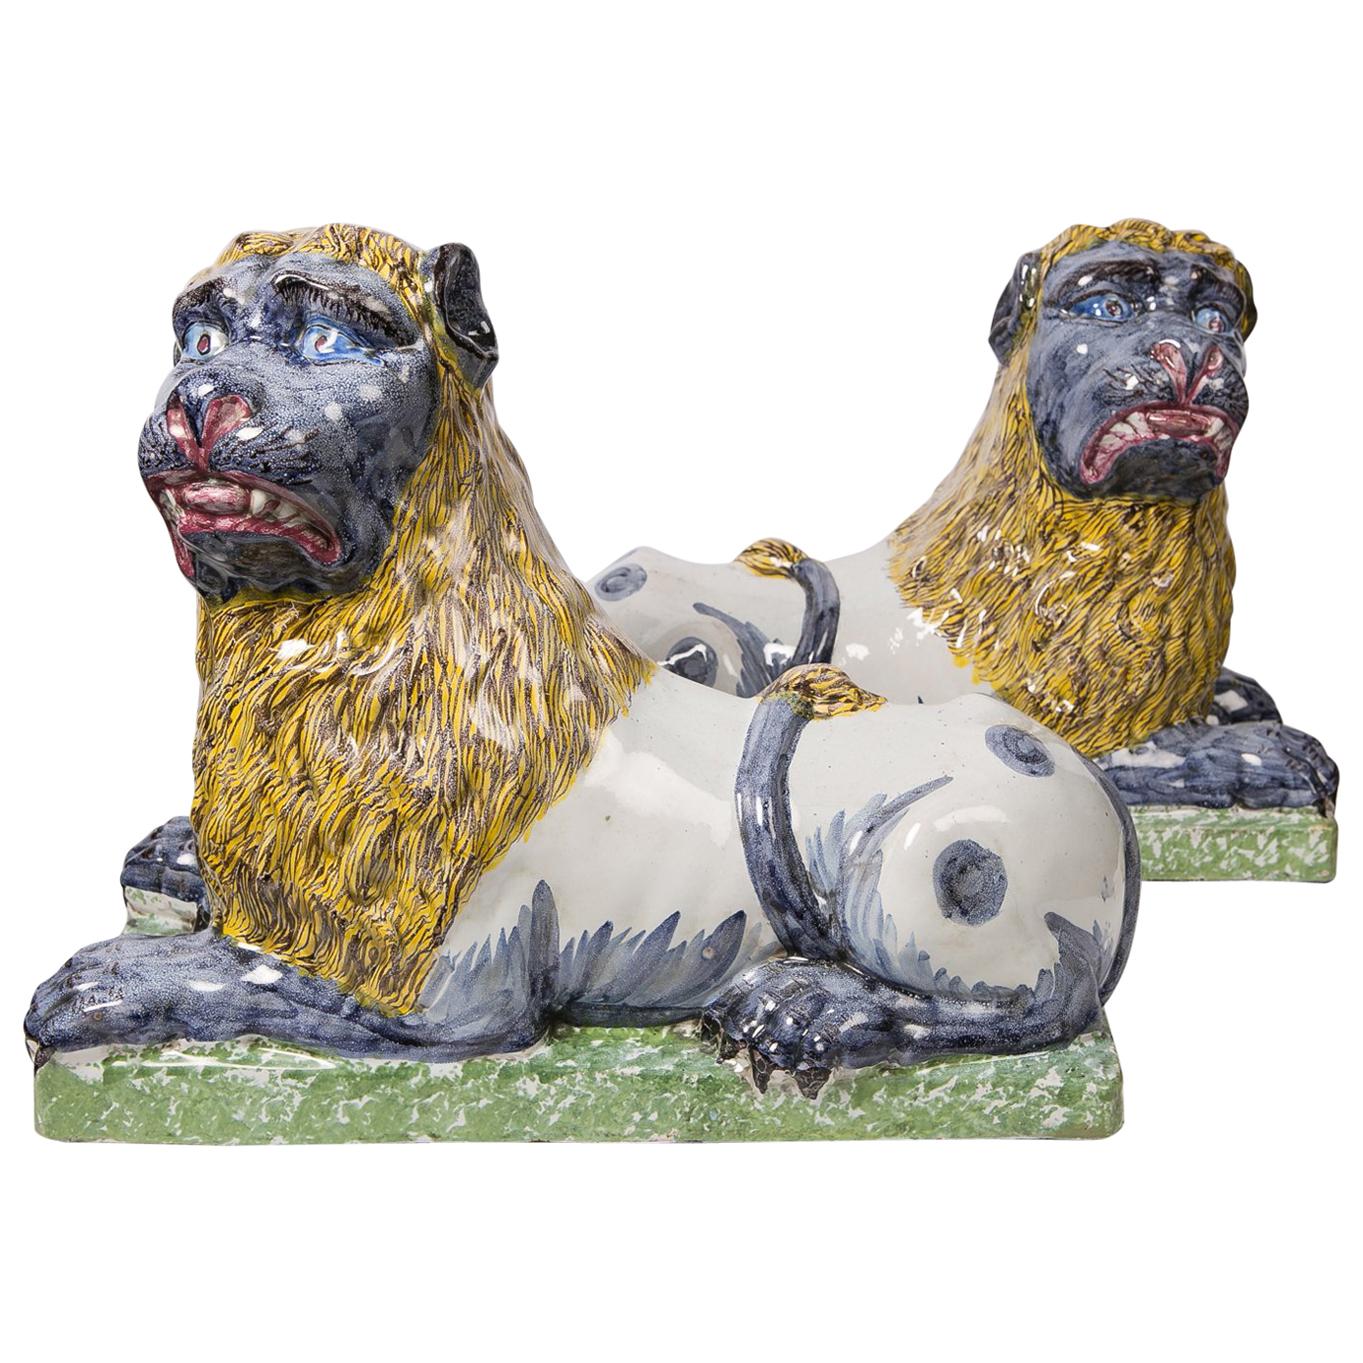 Pair of Large Antique Luneville Lions Made circa 1800